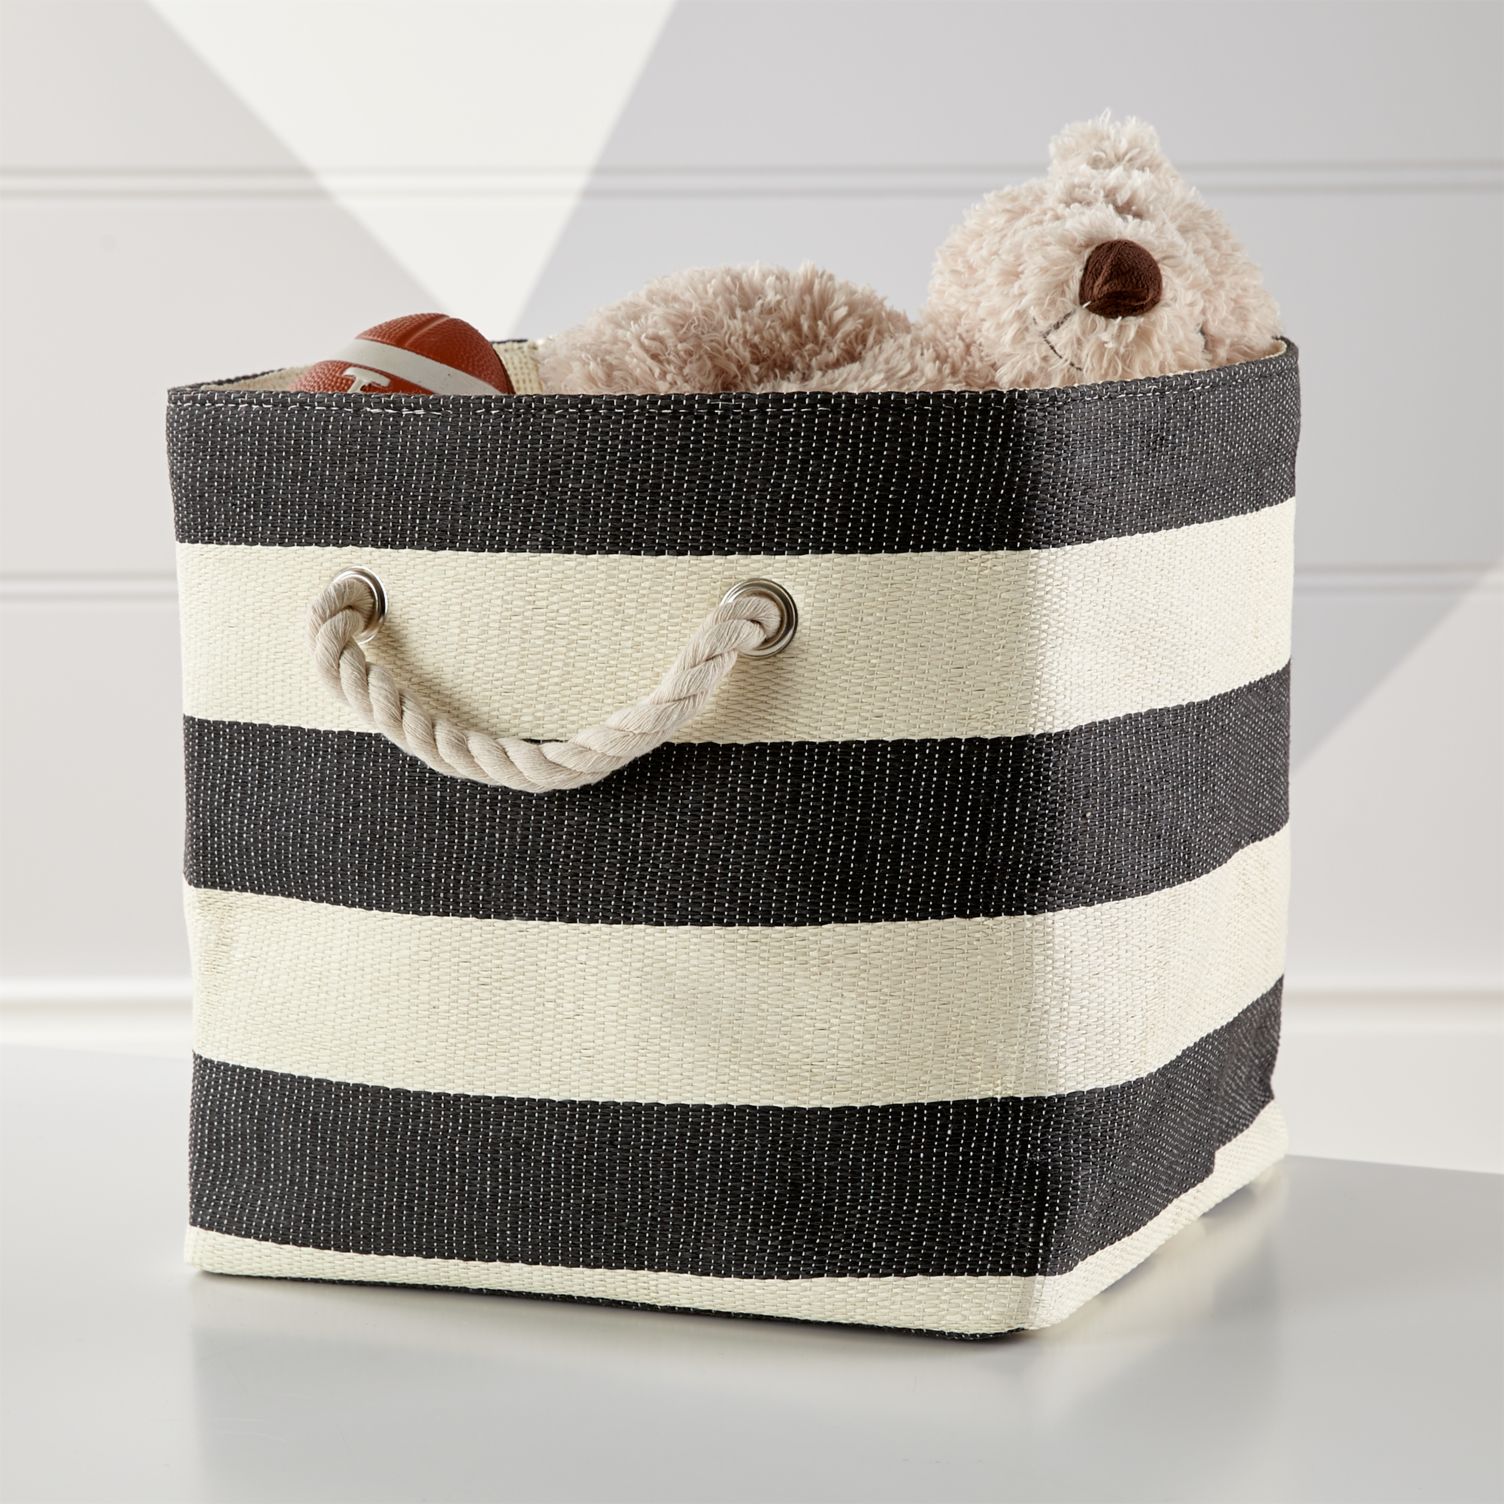 Black-and-white-striped-storage-bin-with-rope-handle